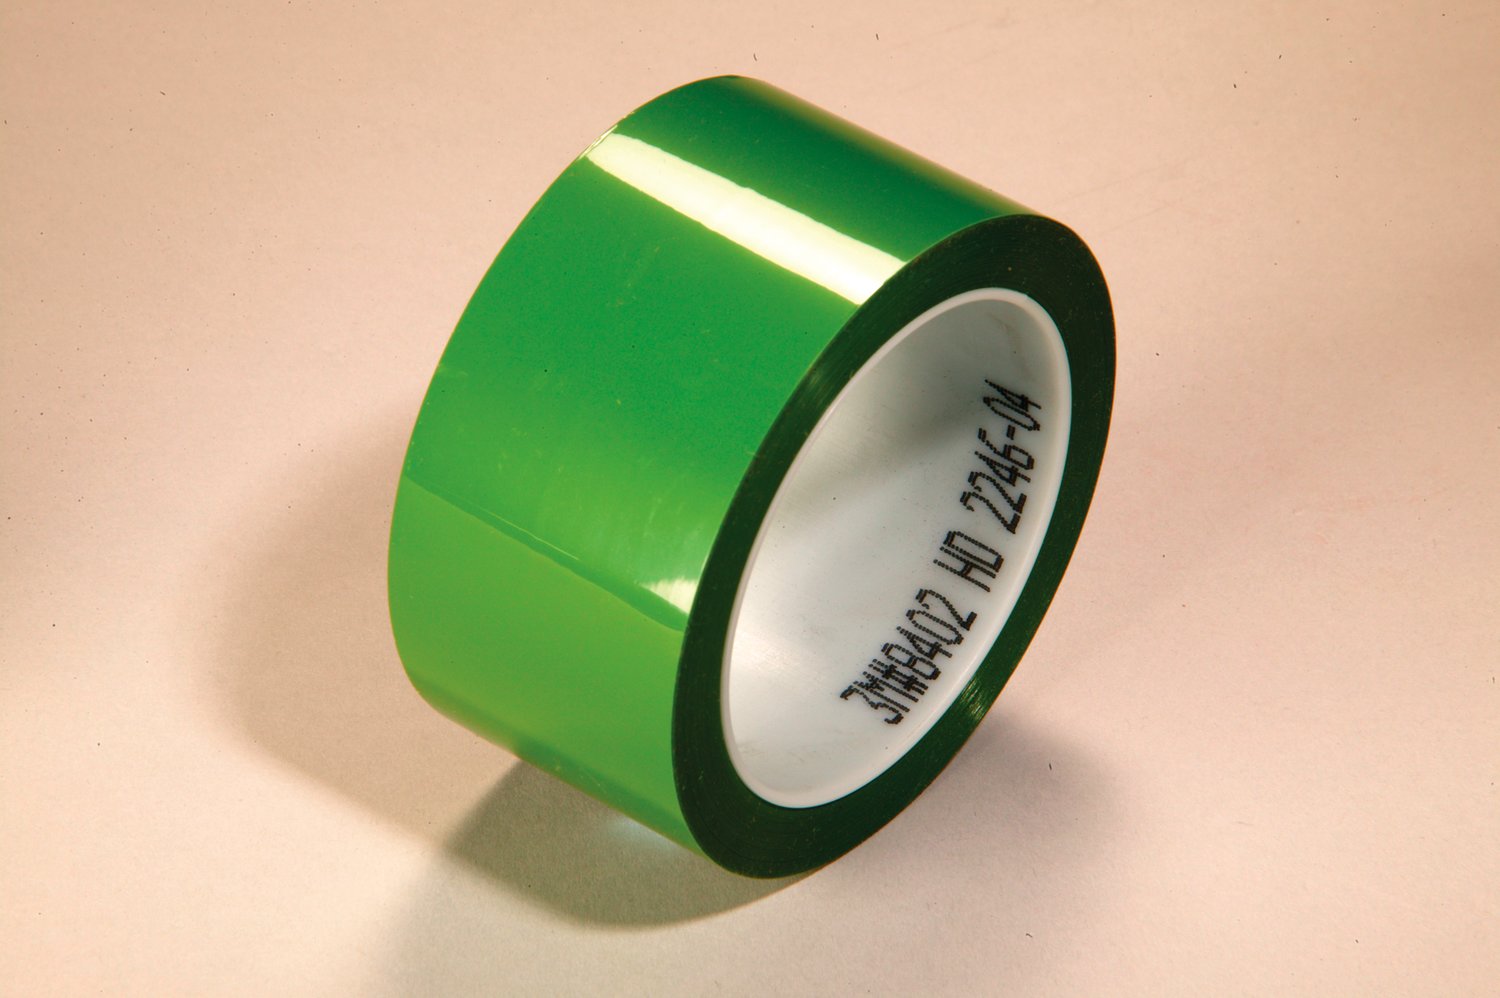 7100018795 - 3M Polyester Tape 8402, Green, 1.9 mil, 12 in x 72 yd, 4 rolls per case